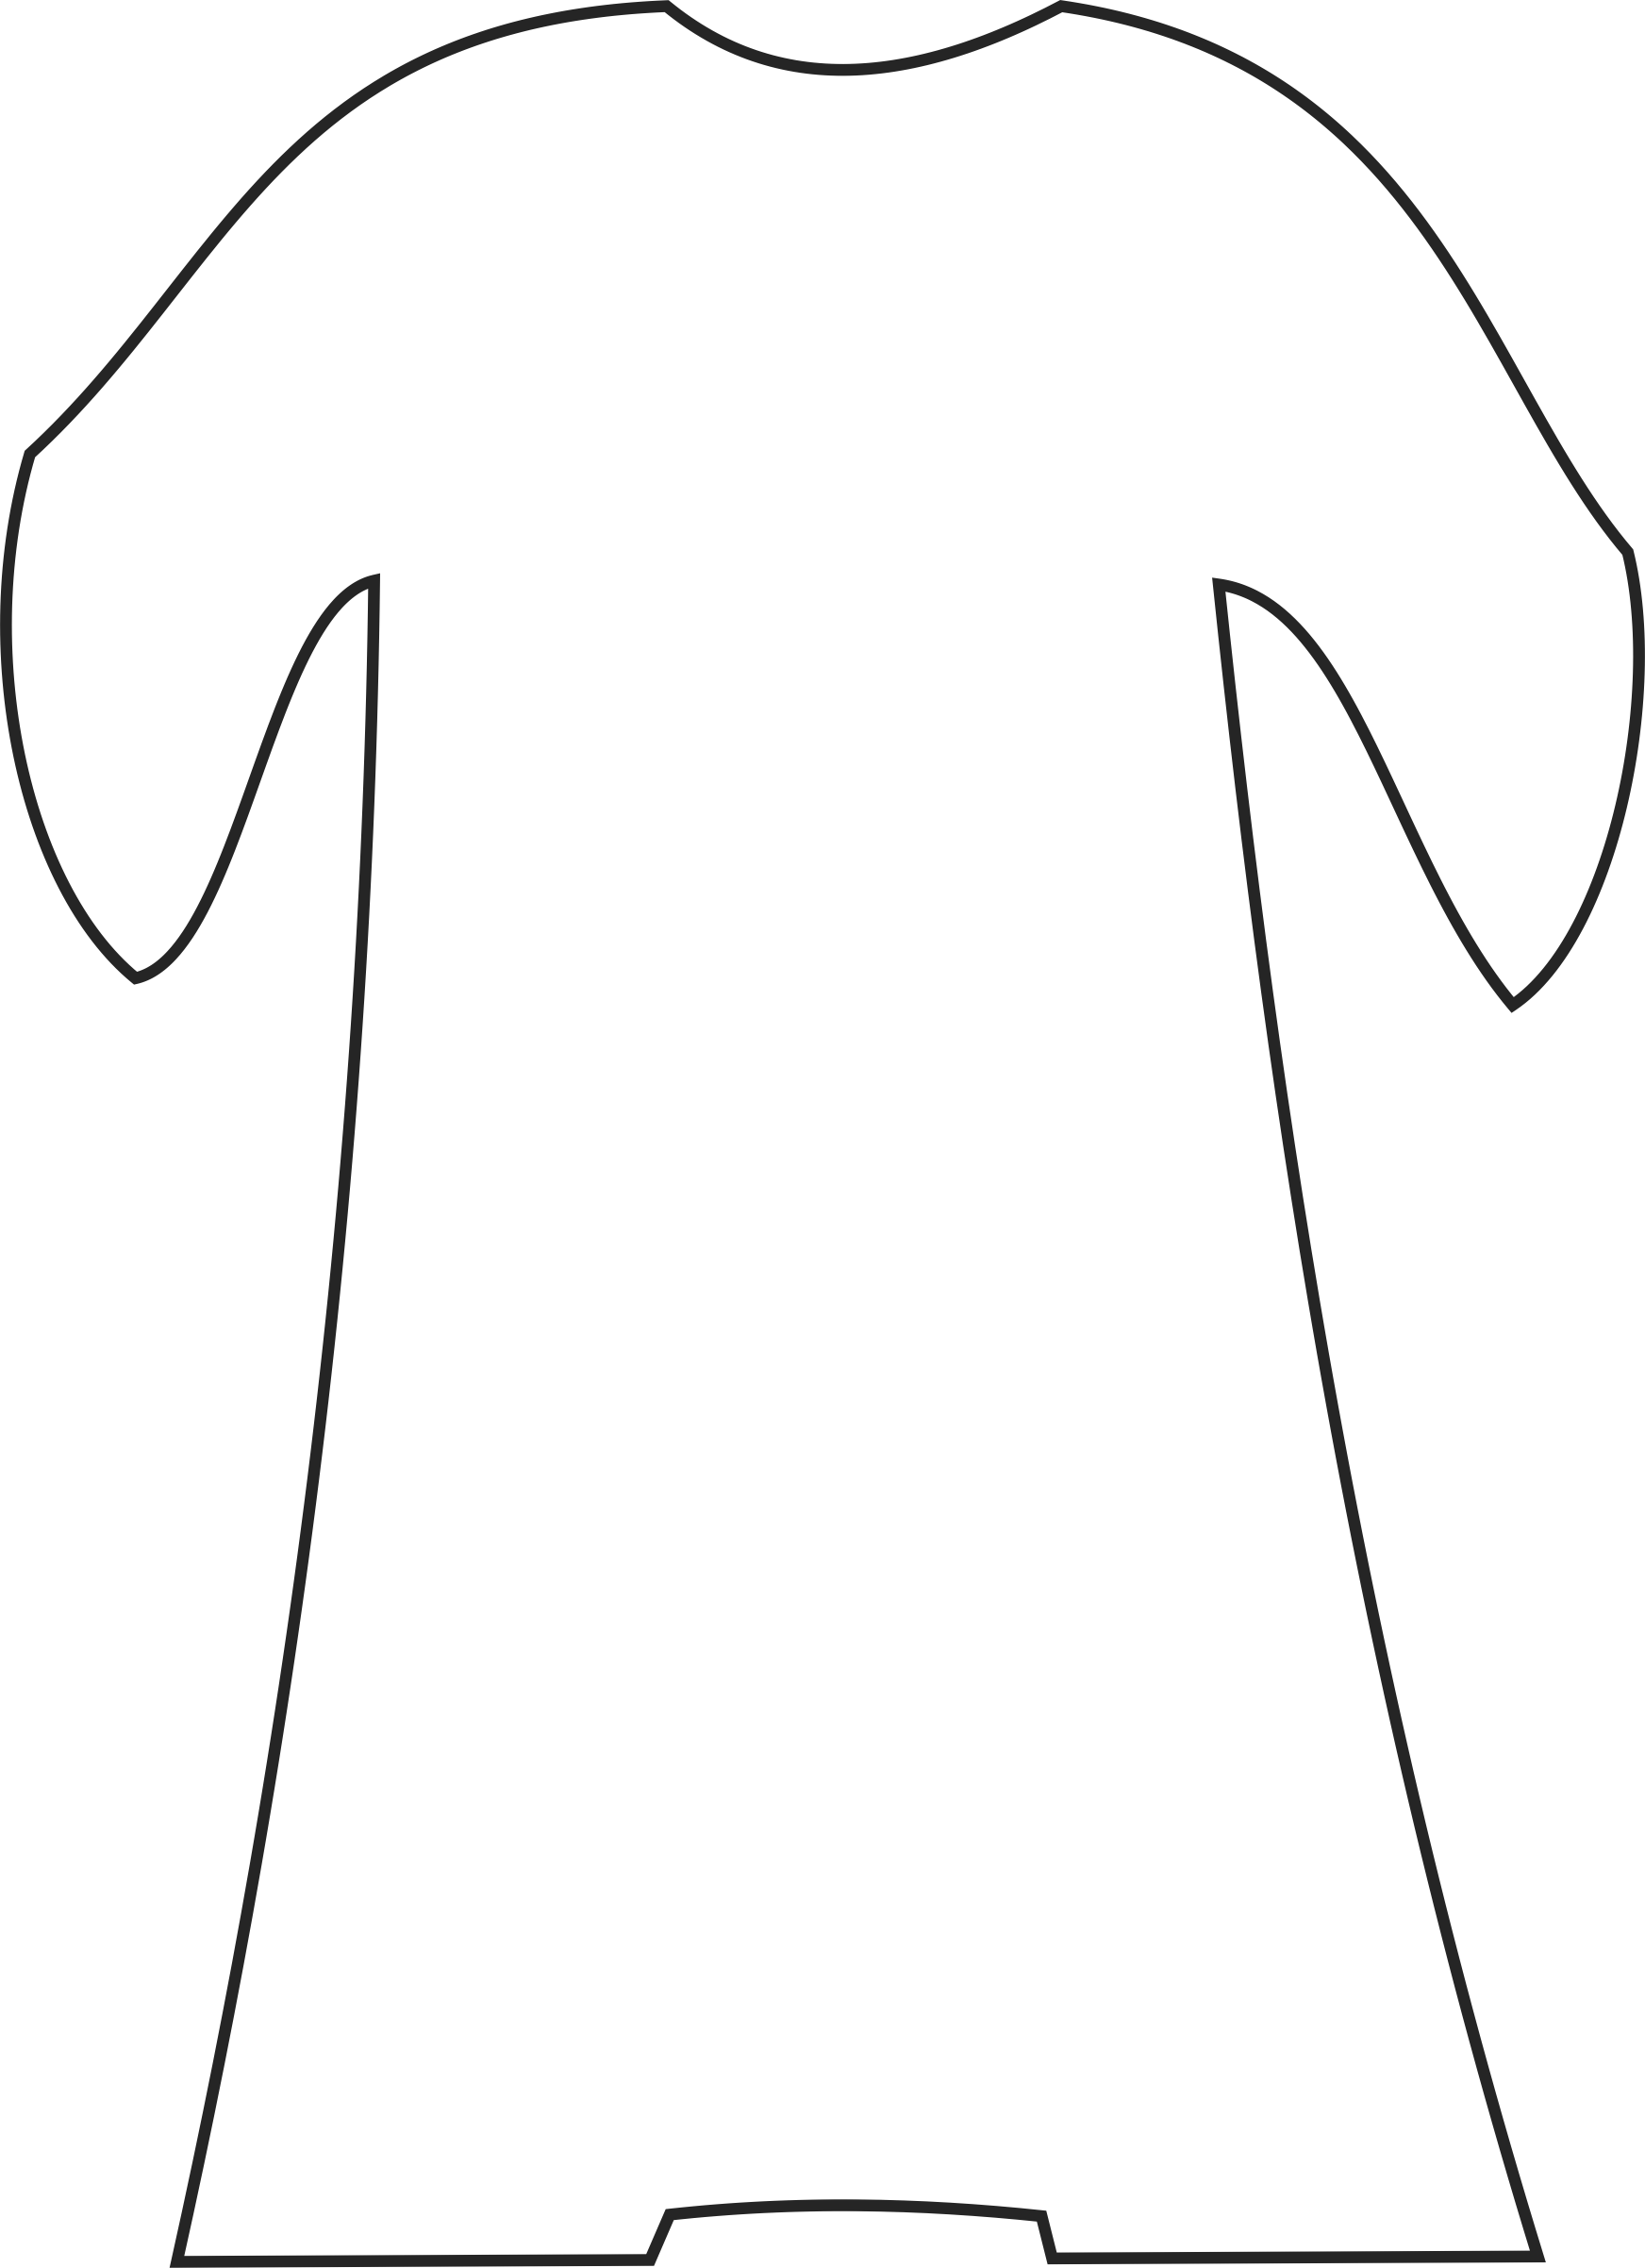 Josephs Coat Of Many Colors Coloring Page - Coloring Home